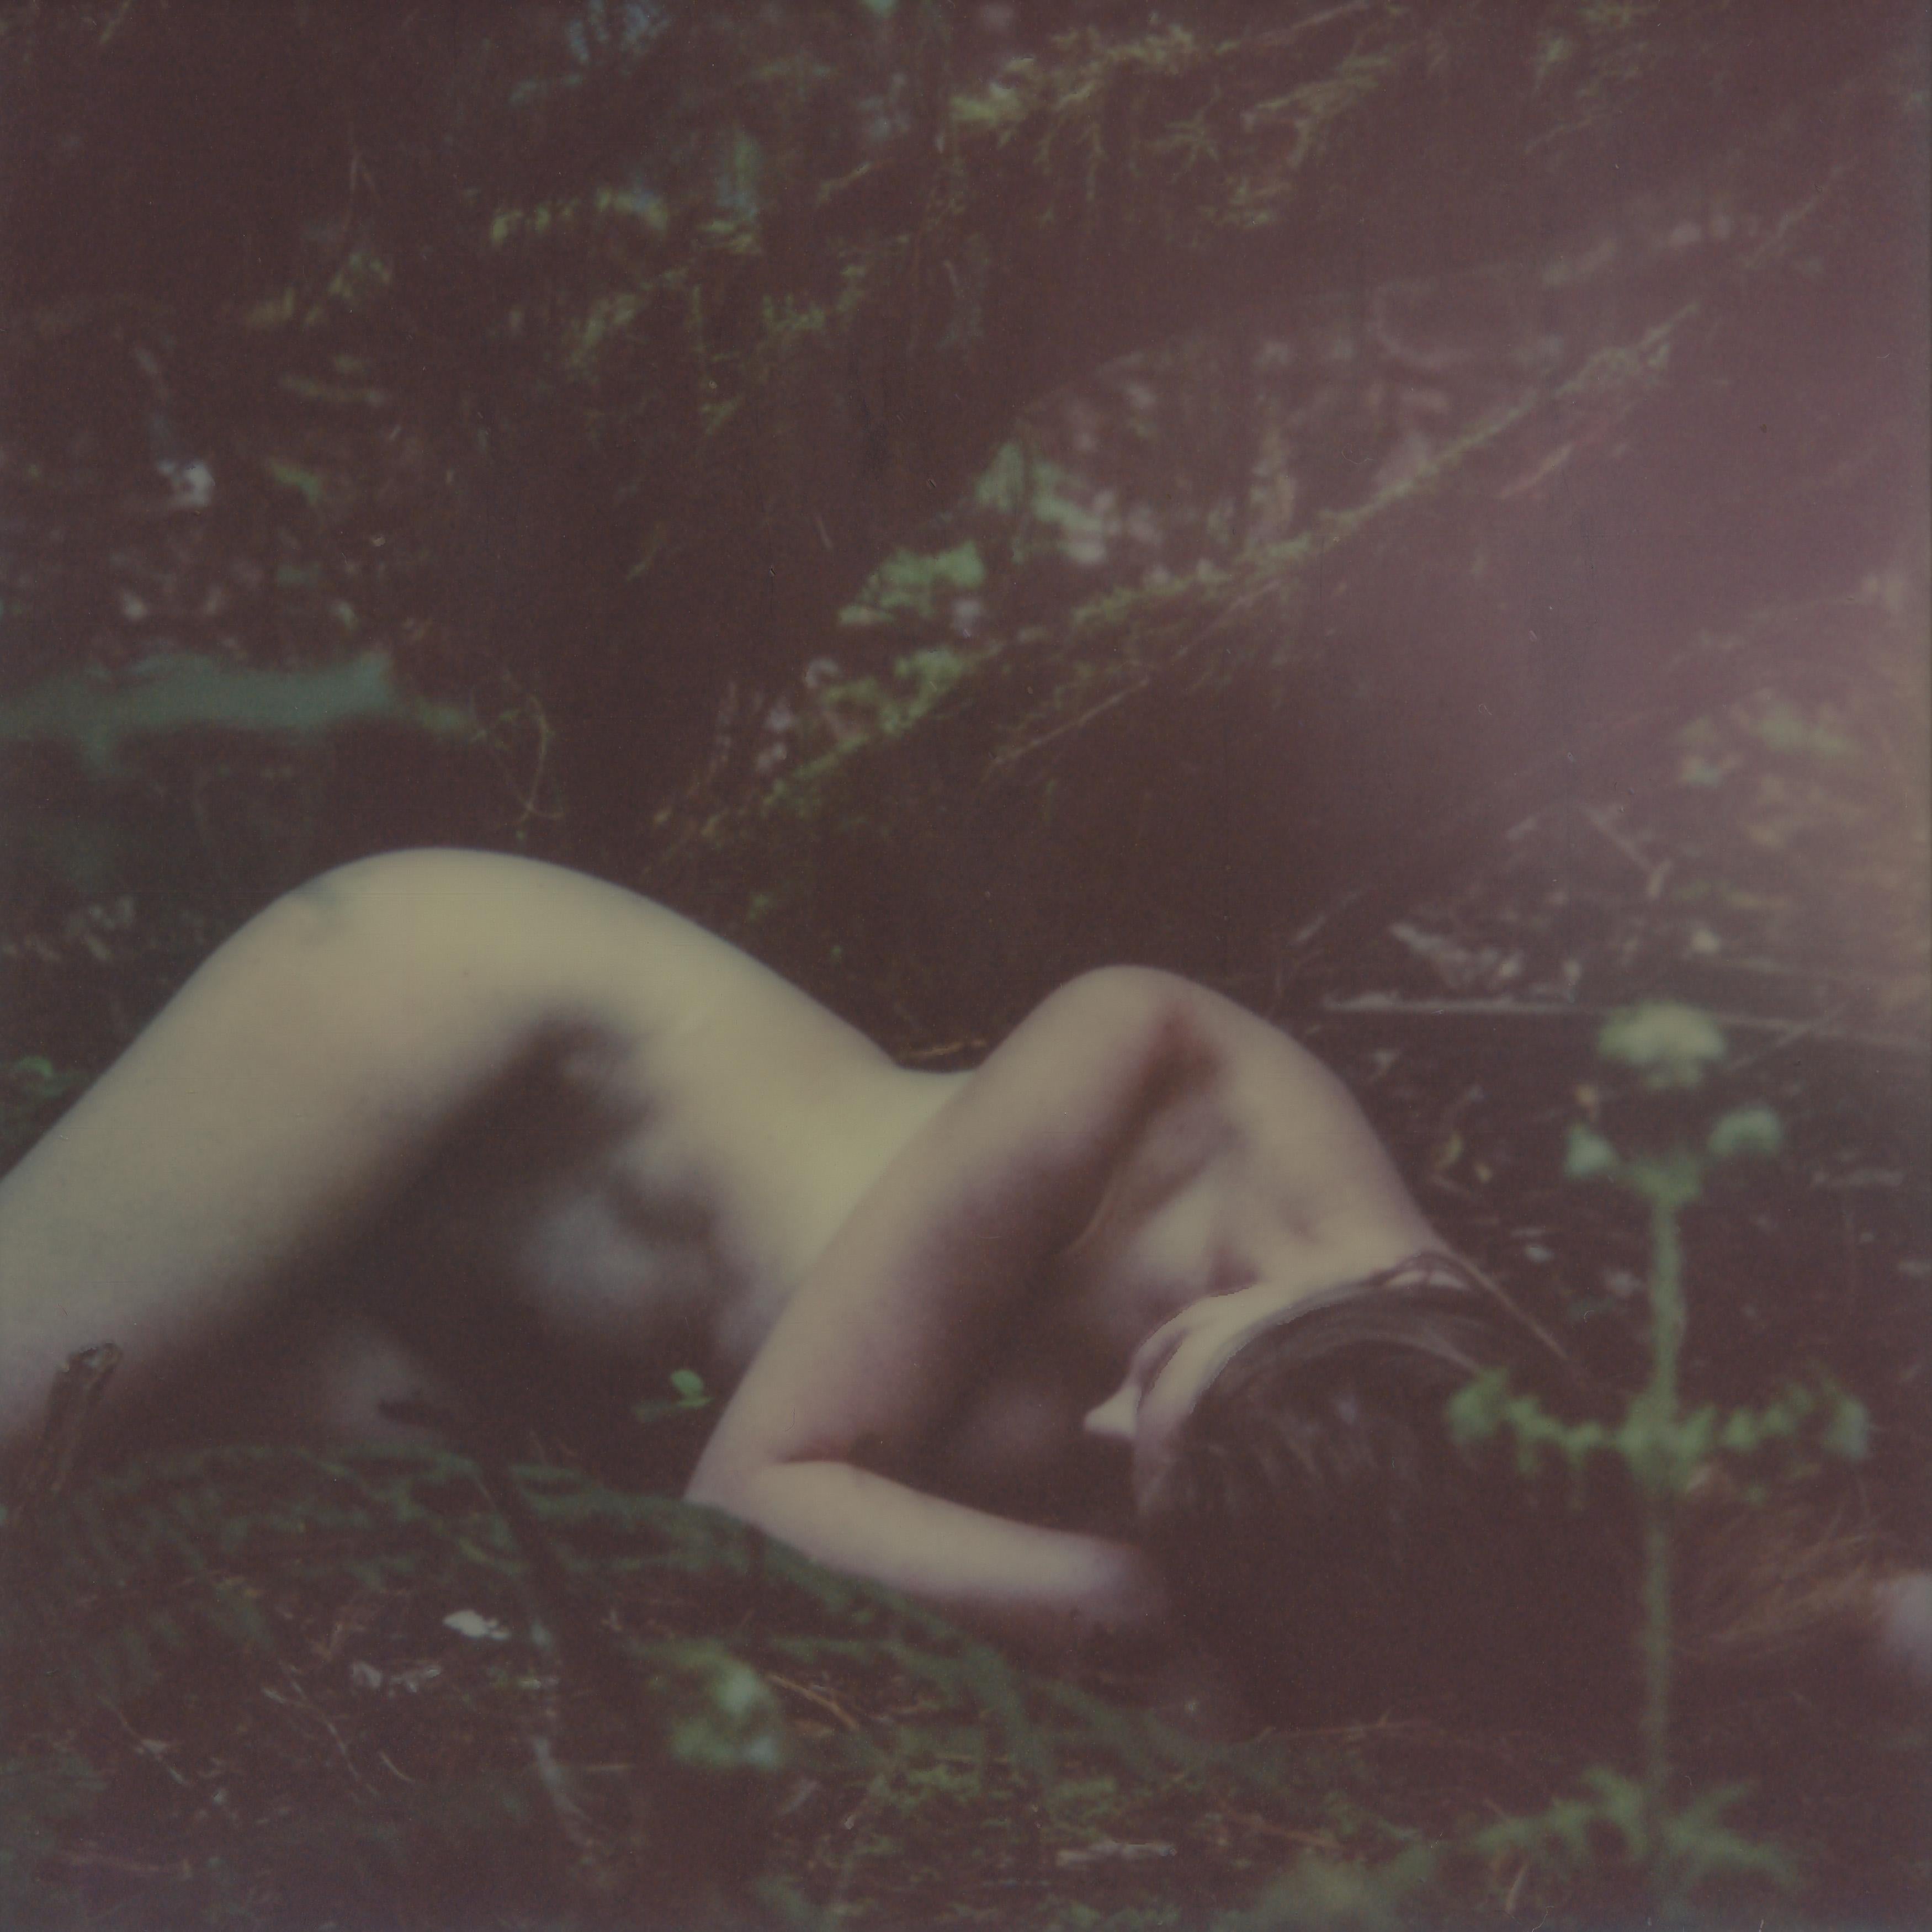 You don't know - Contemporary, Nude, Women, Polaroid, 21st Century